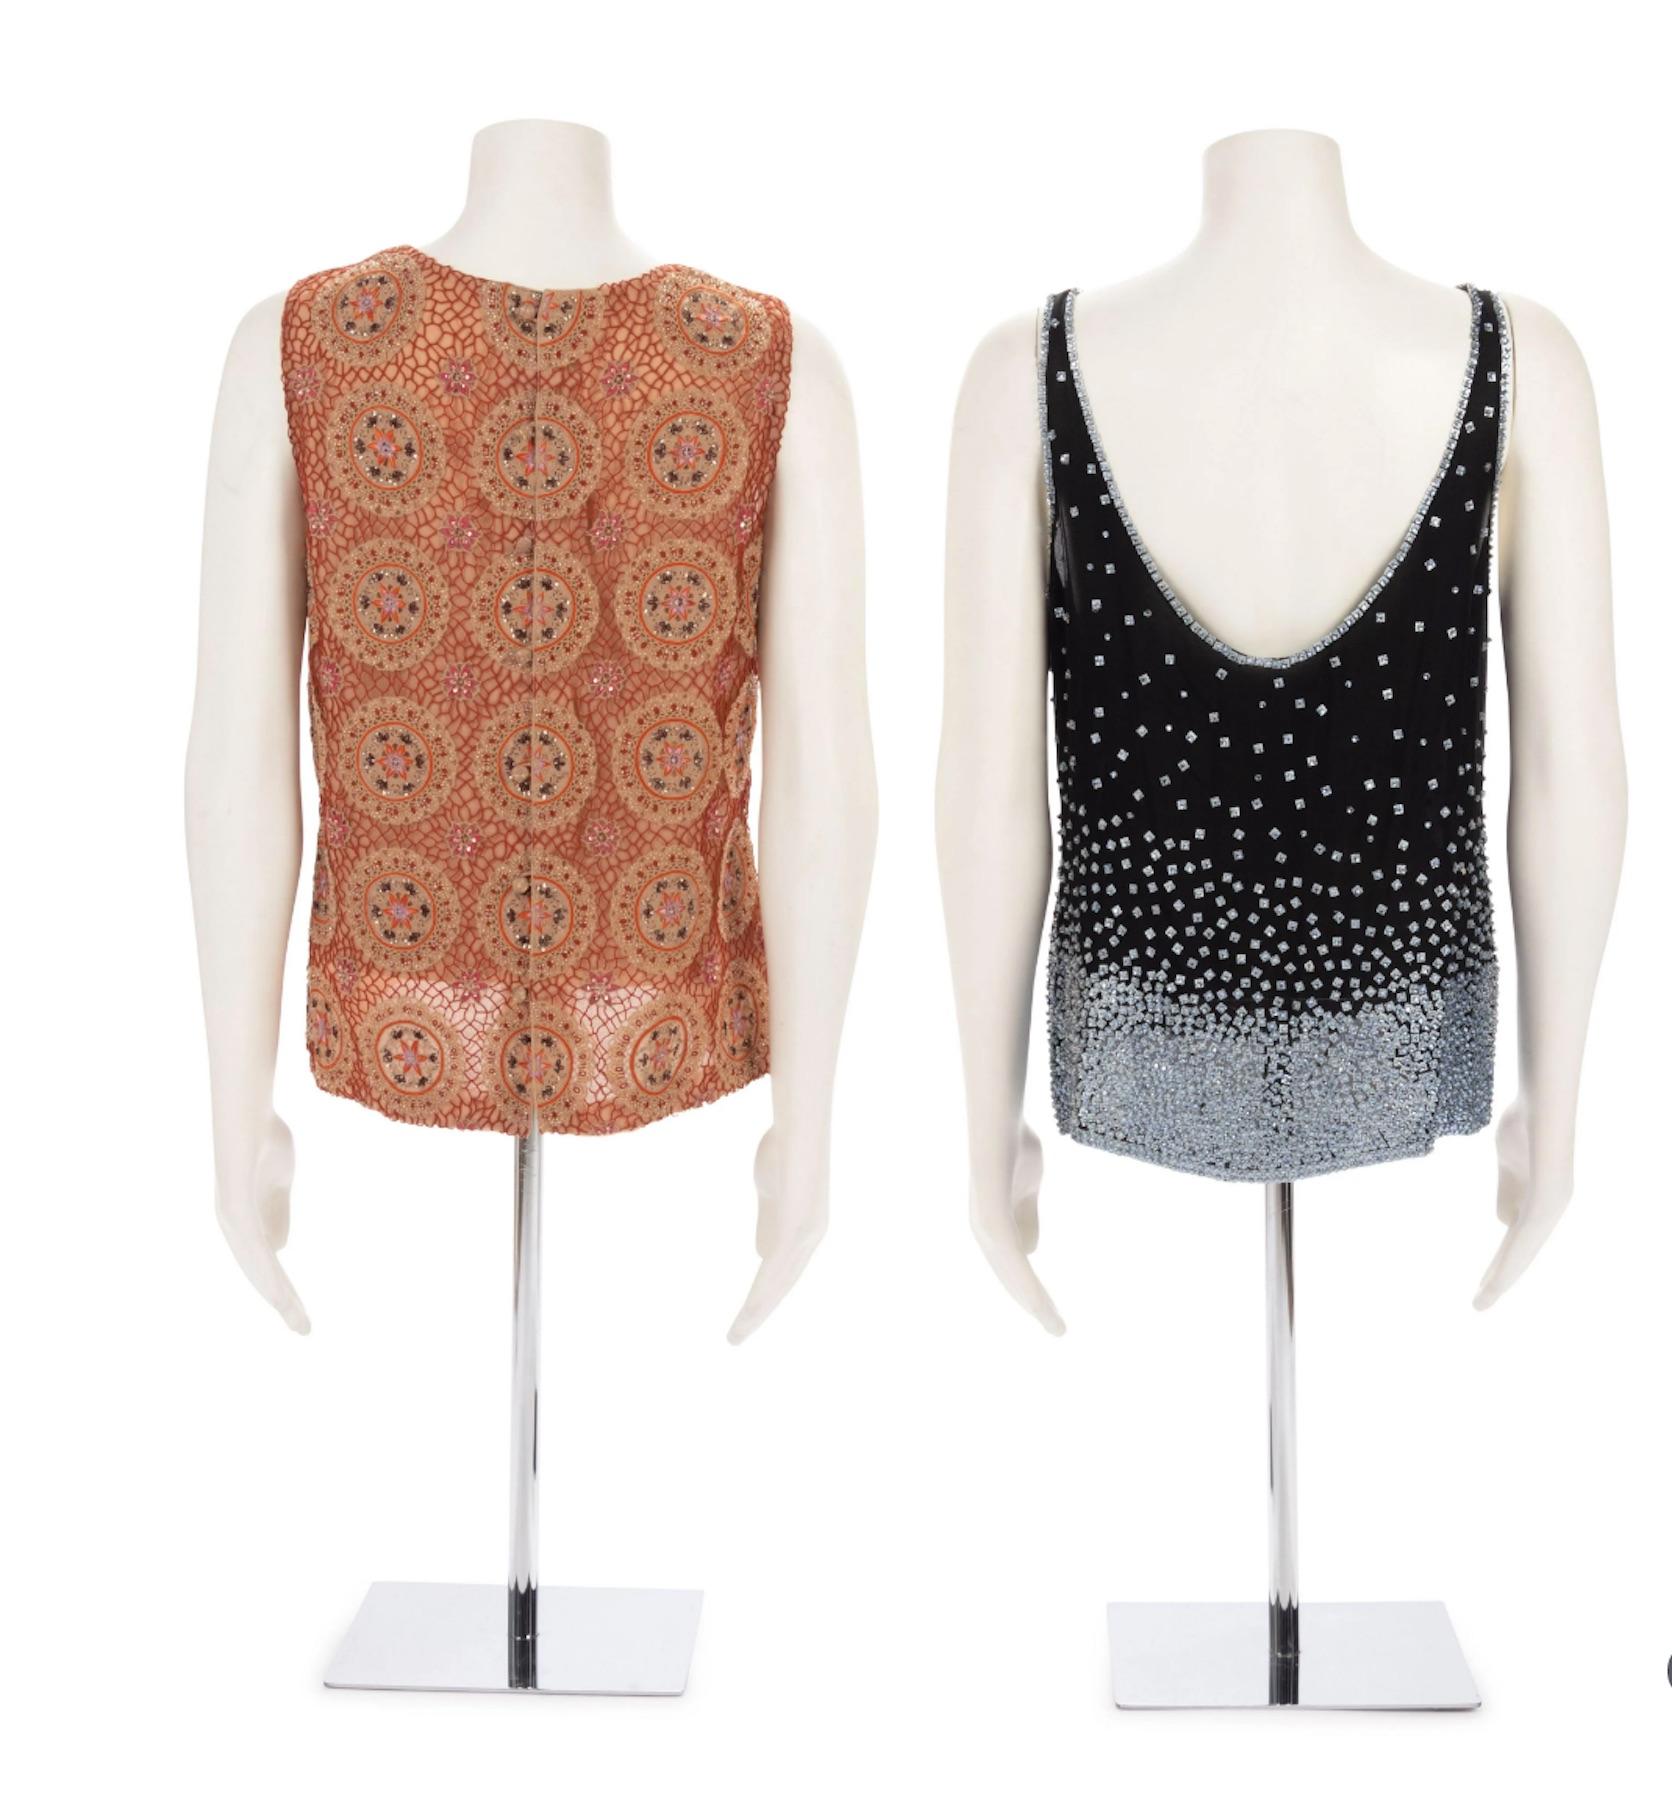 Two Bill Blass Couture Beaded Tops.  New Still Retaining Their Original Pricetags.  Priced Per Top.

THE FIRST
Nude silk chiffon with red thread circle embroidered jewel neck sleeveless top embellished with beads and faceted sequins, and center back